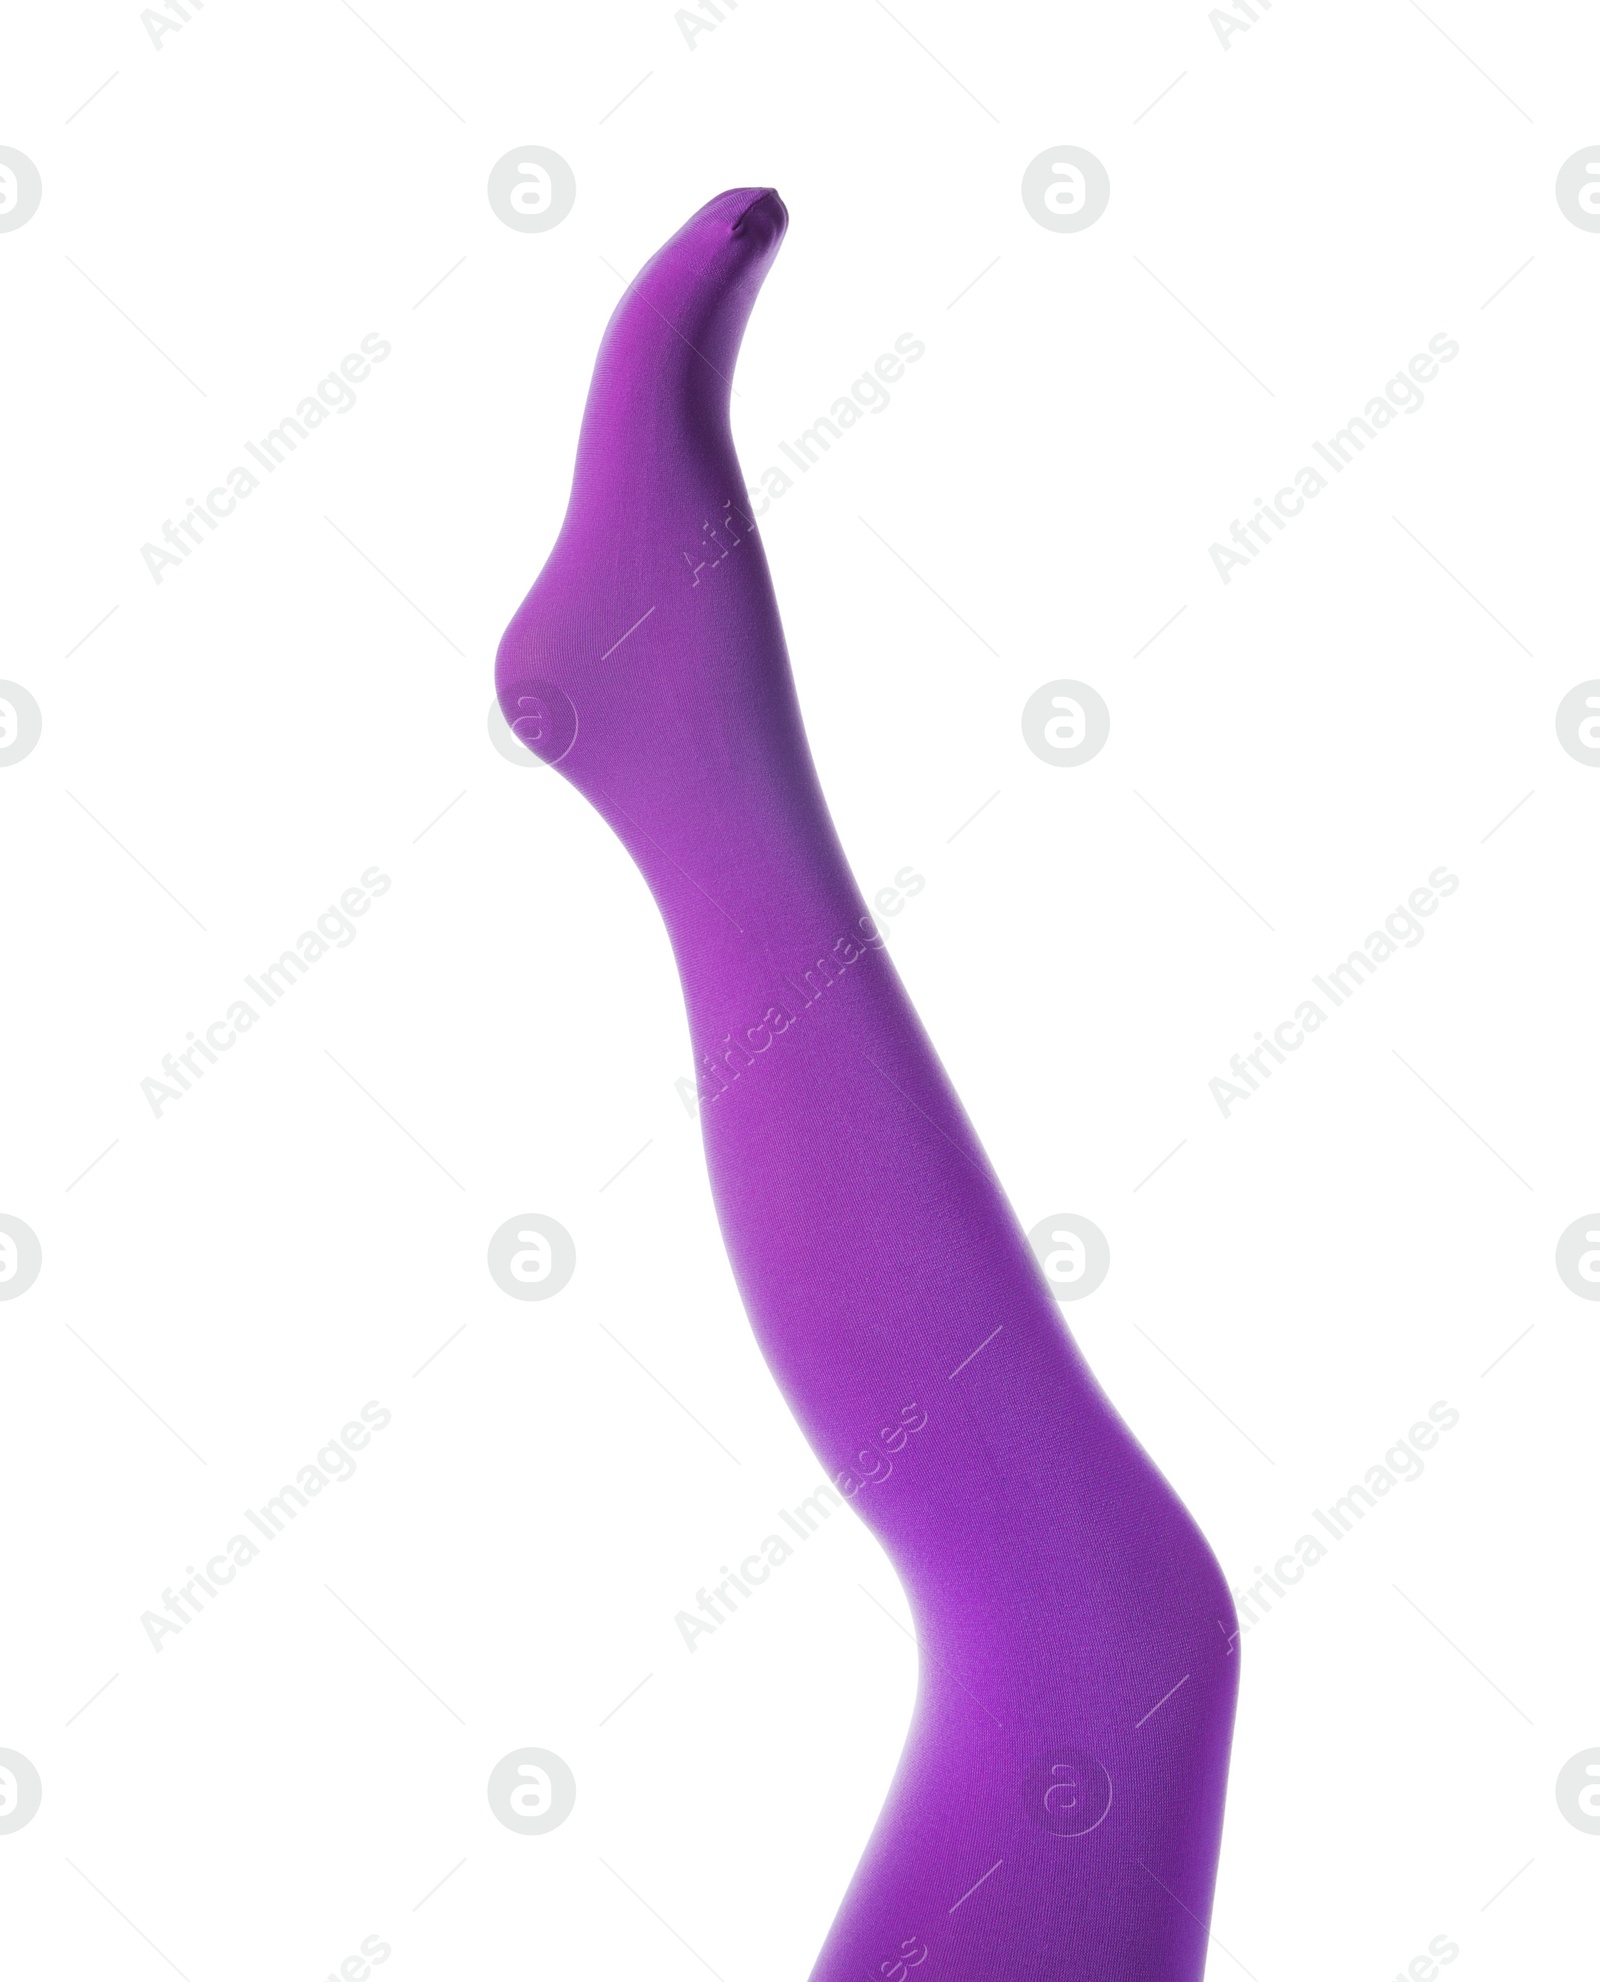 Photo of Leg mannequin in purple tights on white background